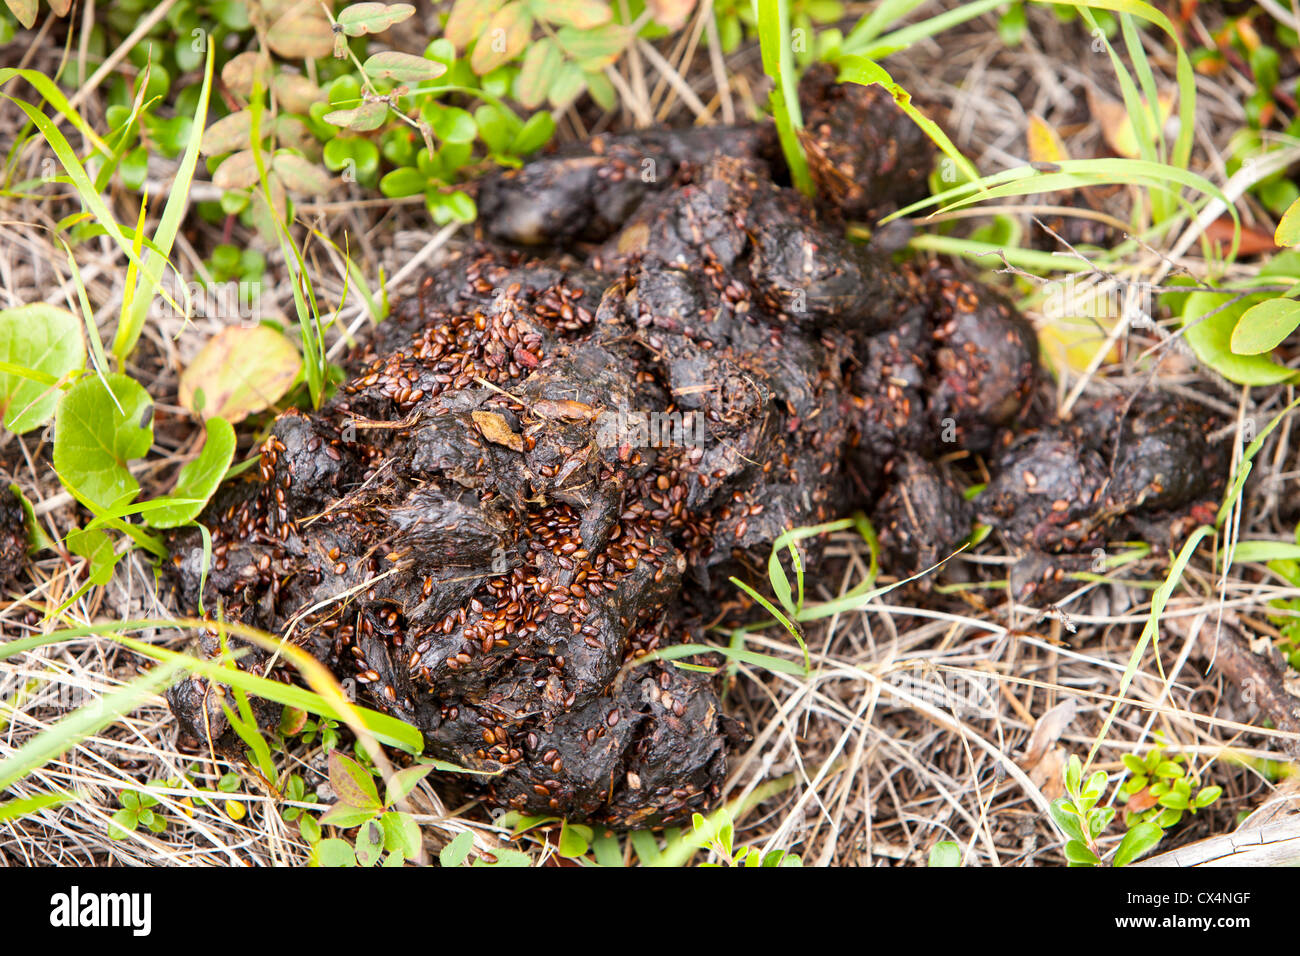 Black Bear Scat That Has Been Feeding On Berries To Feed Up For